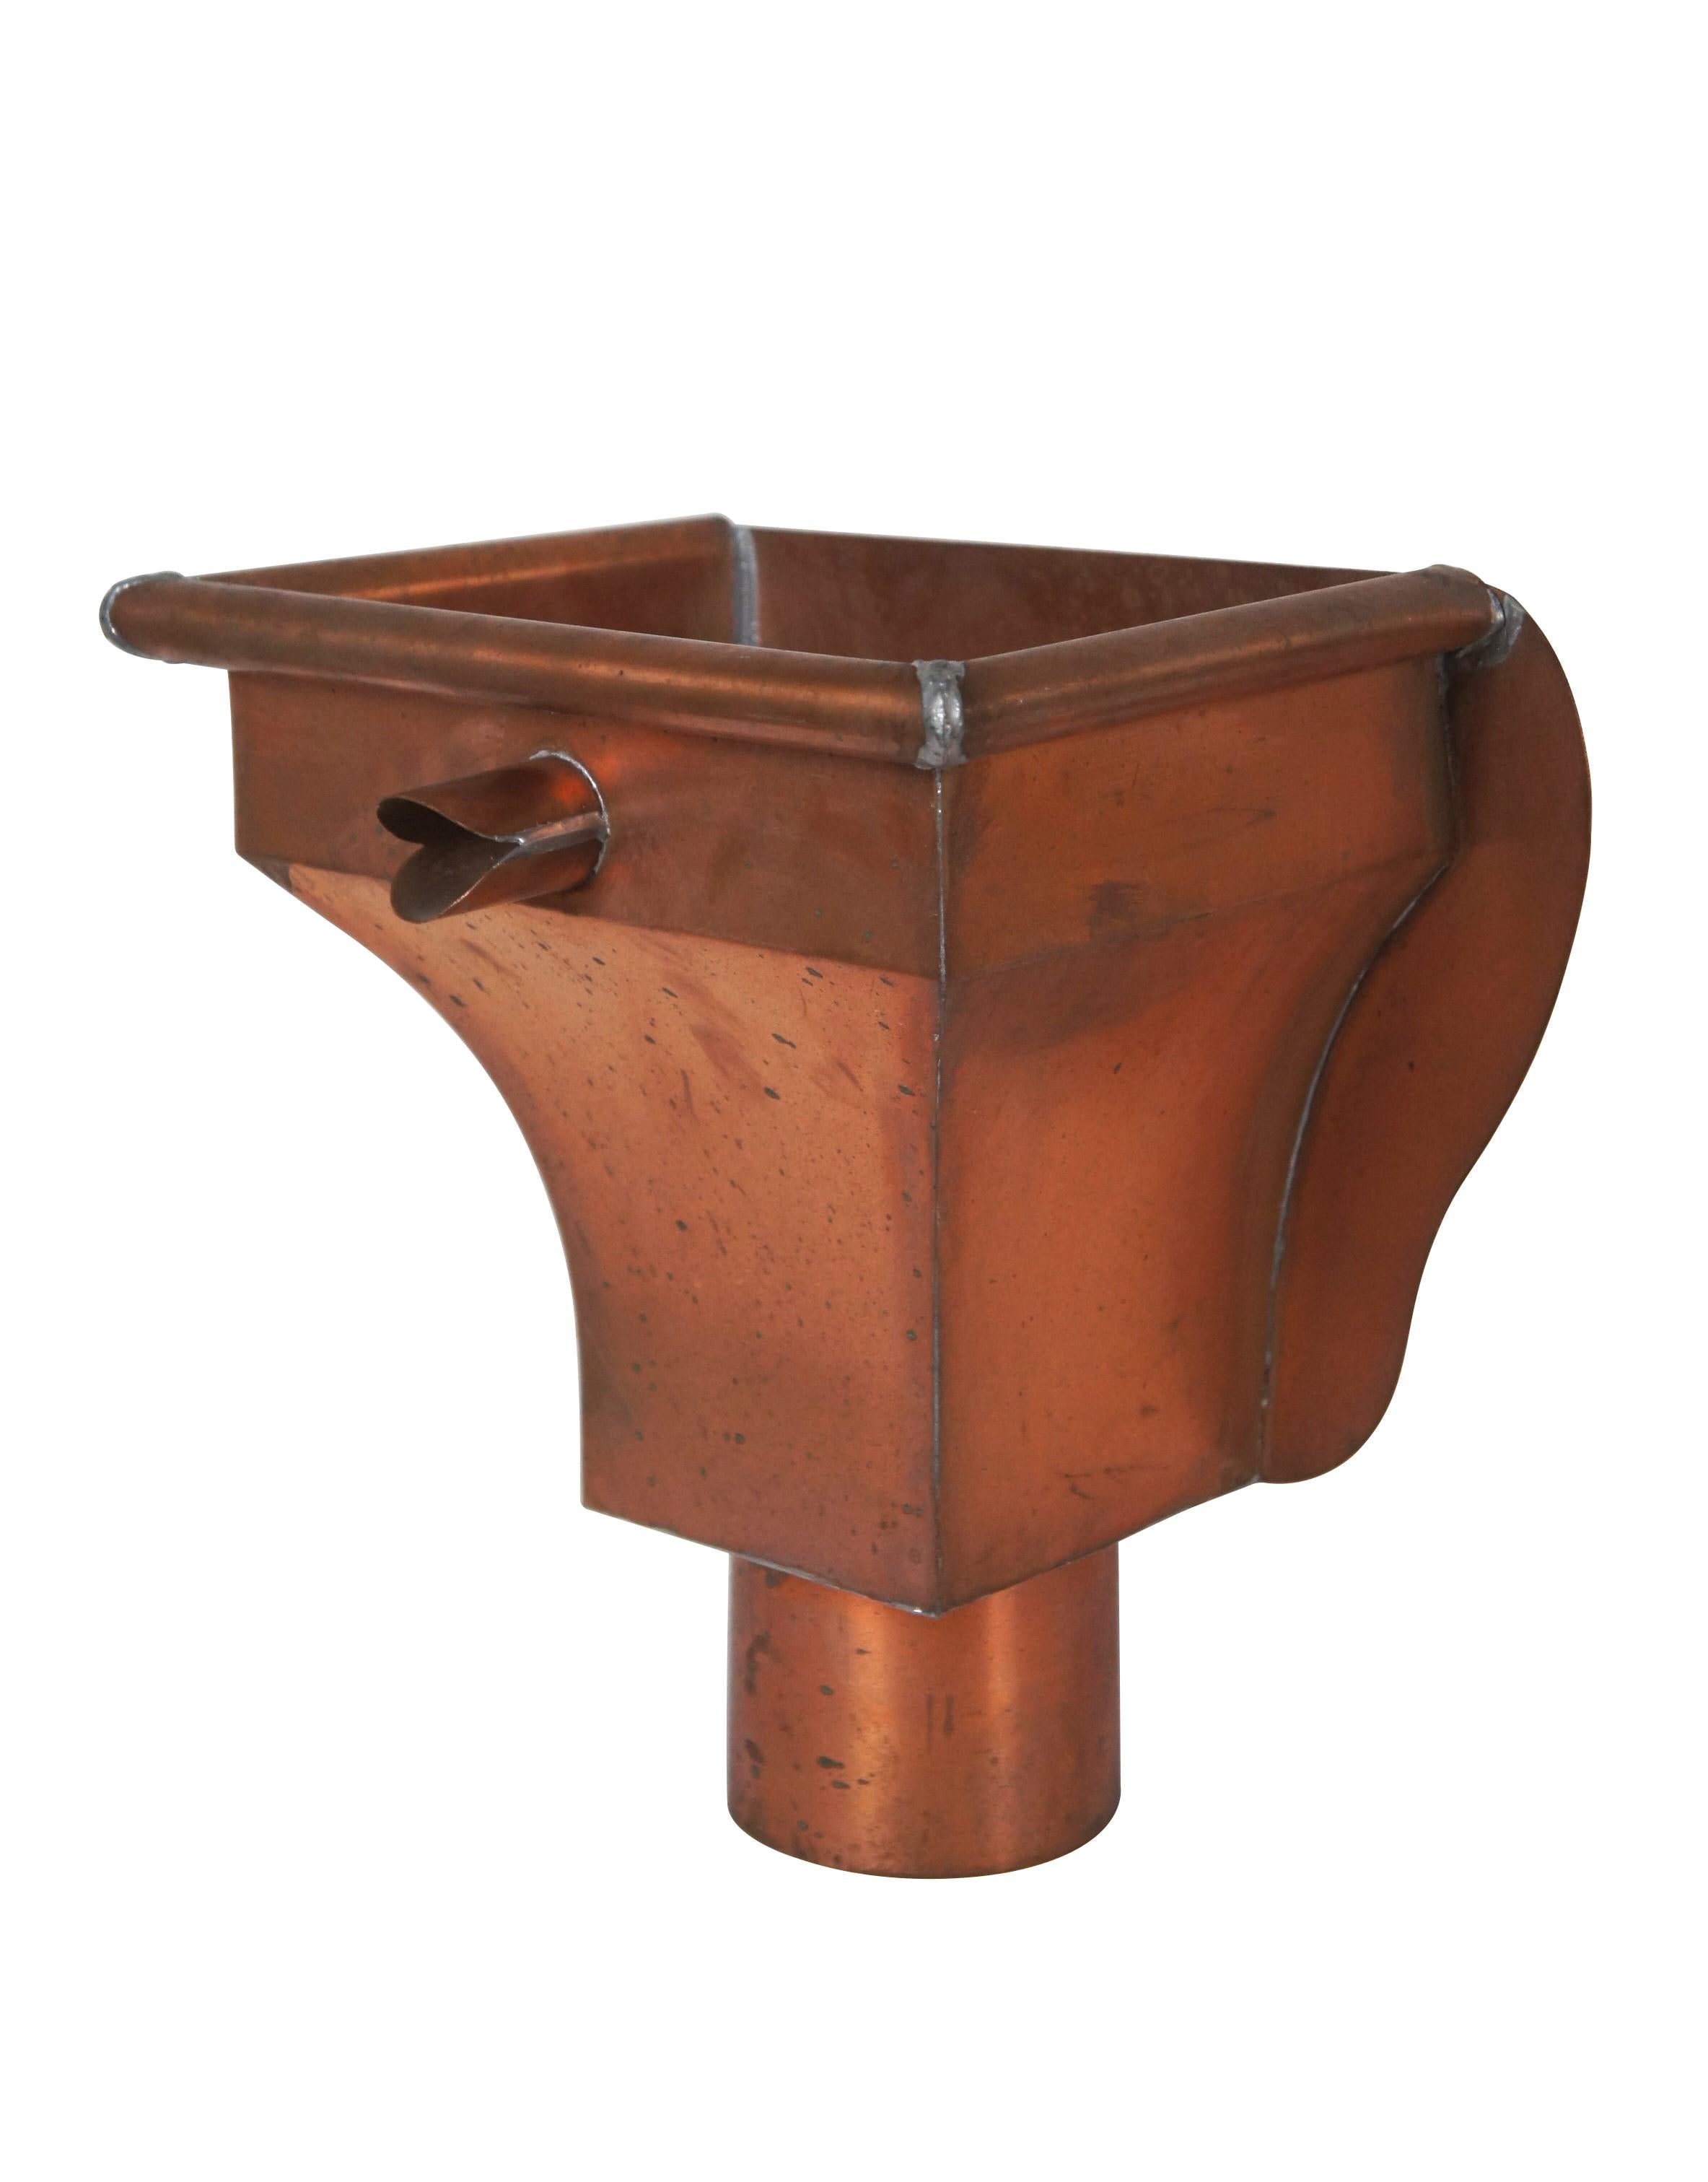 Pair of late 20th century copper gutter leader heads / leader boxes / hoppers with overflow pipe. Italian / Old Dutch styling with bird's beak shaped overflow spouts. Base Diameter 4